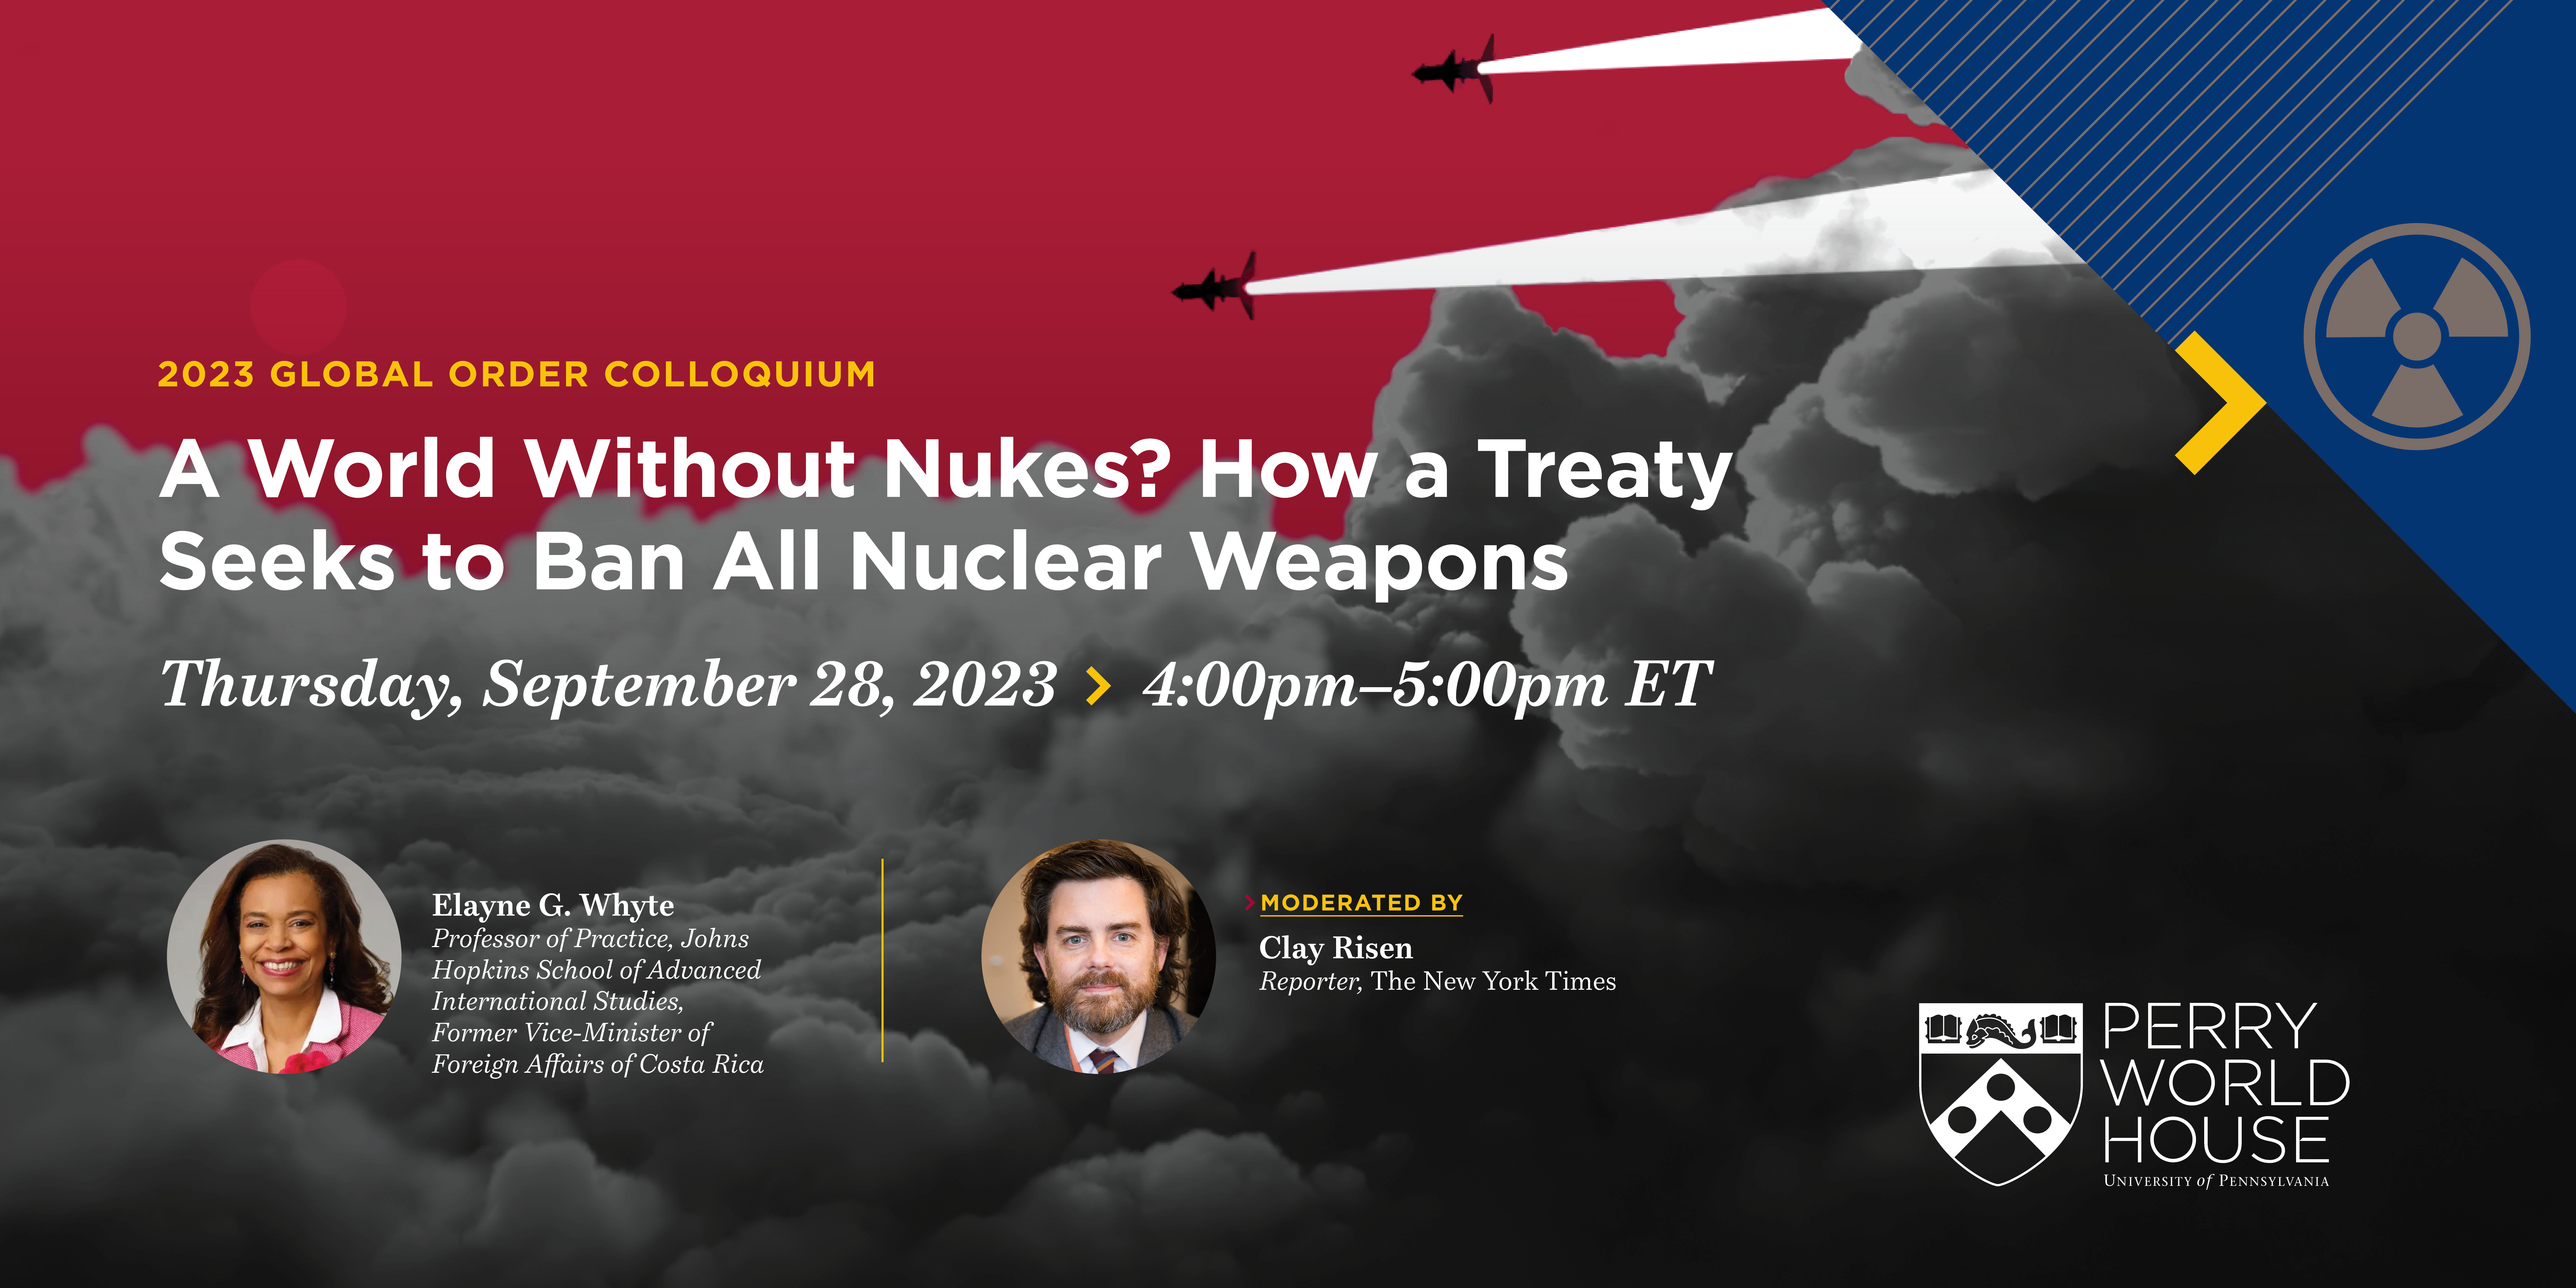 A World Without Nukes? How a Treaty Seeks to Ban All Nuclear Weapons